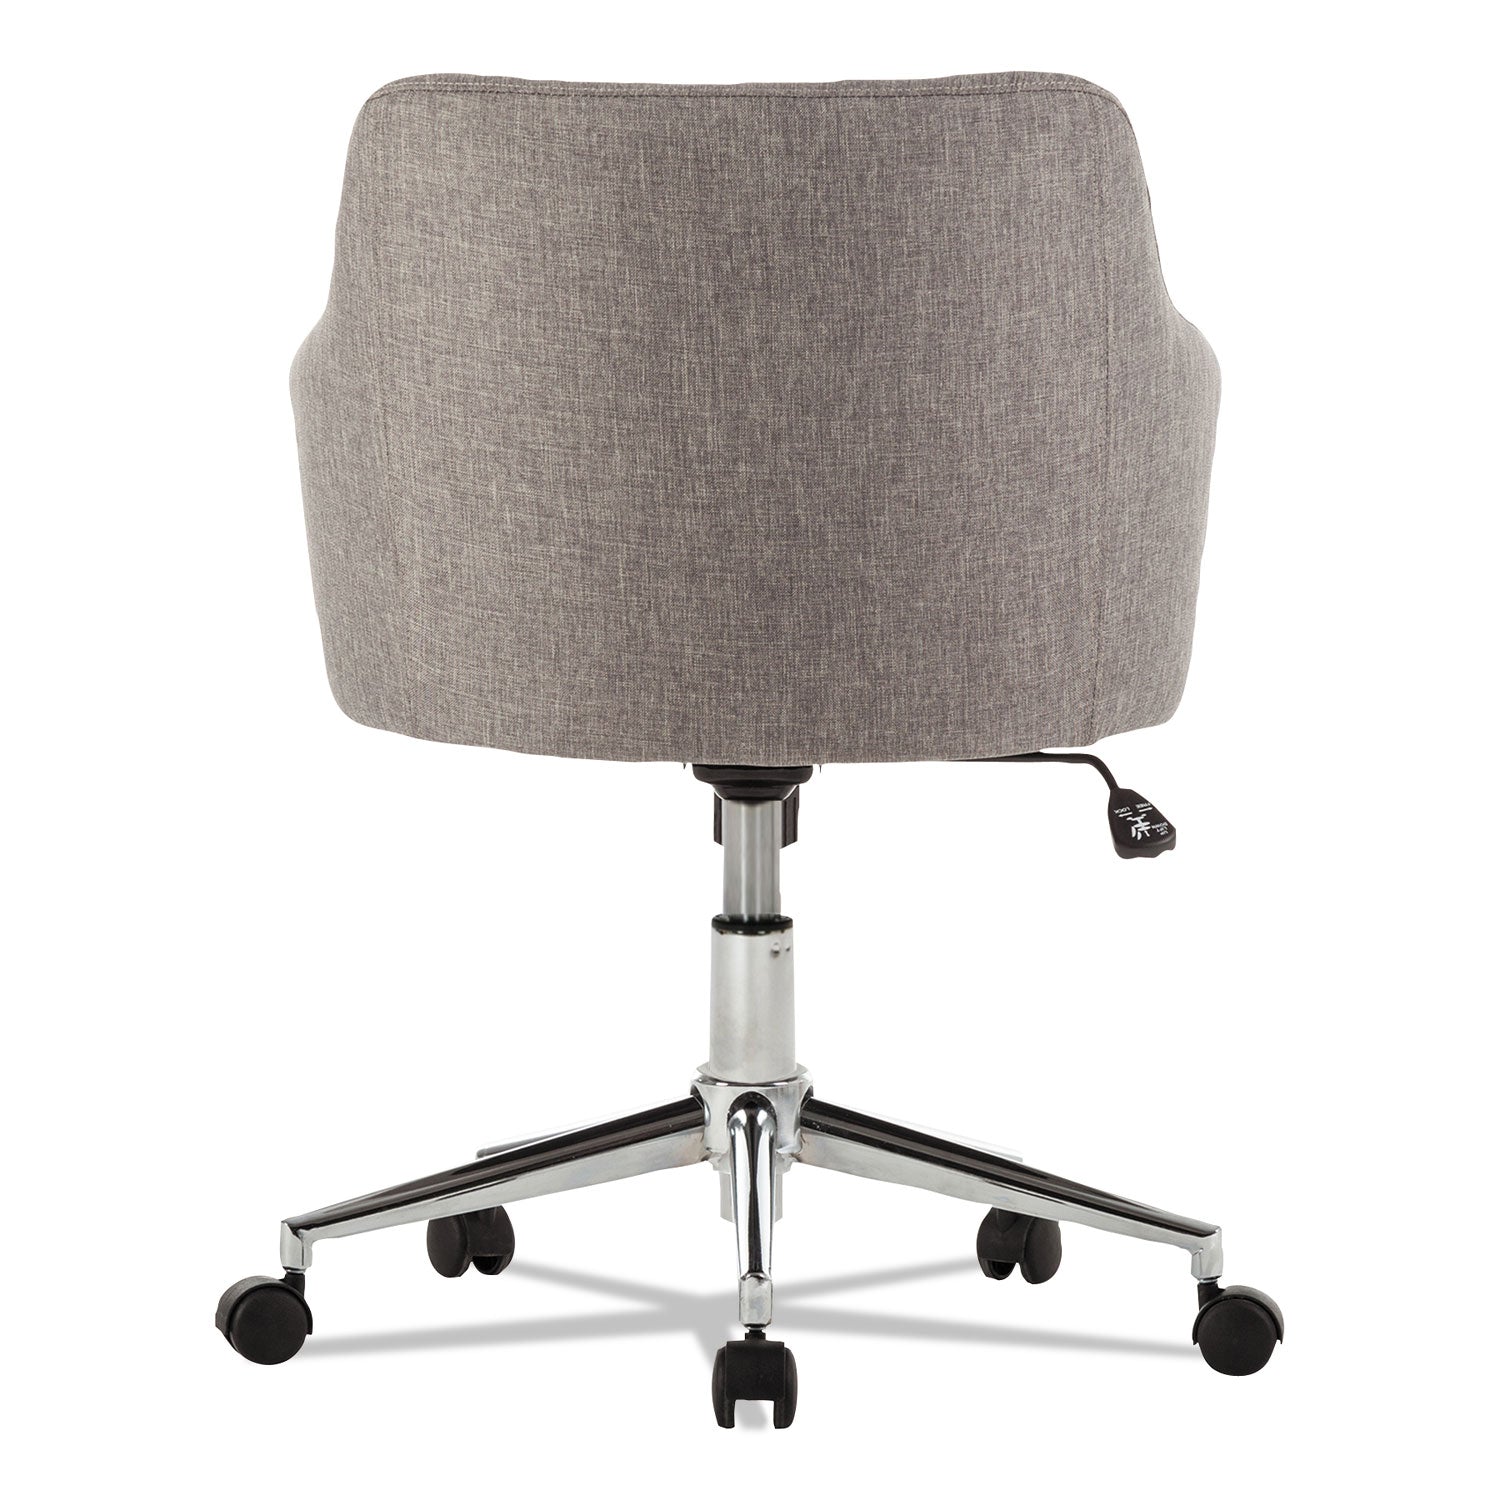 alera-captain-series-mid-back-chair-supports-up-to-275-lb-175-to-205-seat-height-gray-tweed-seat-back-chrome-base_alecs4251 - 4